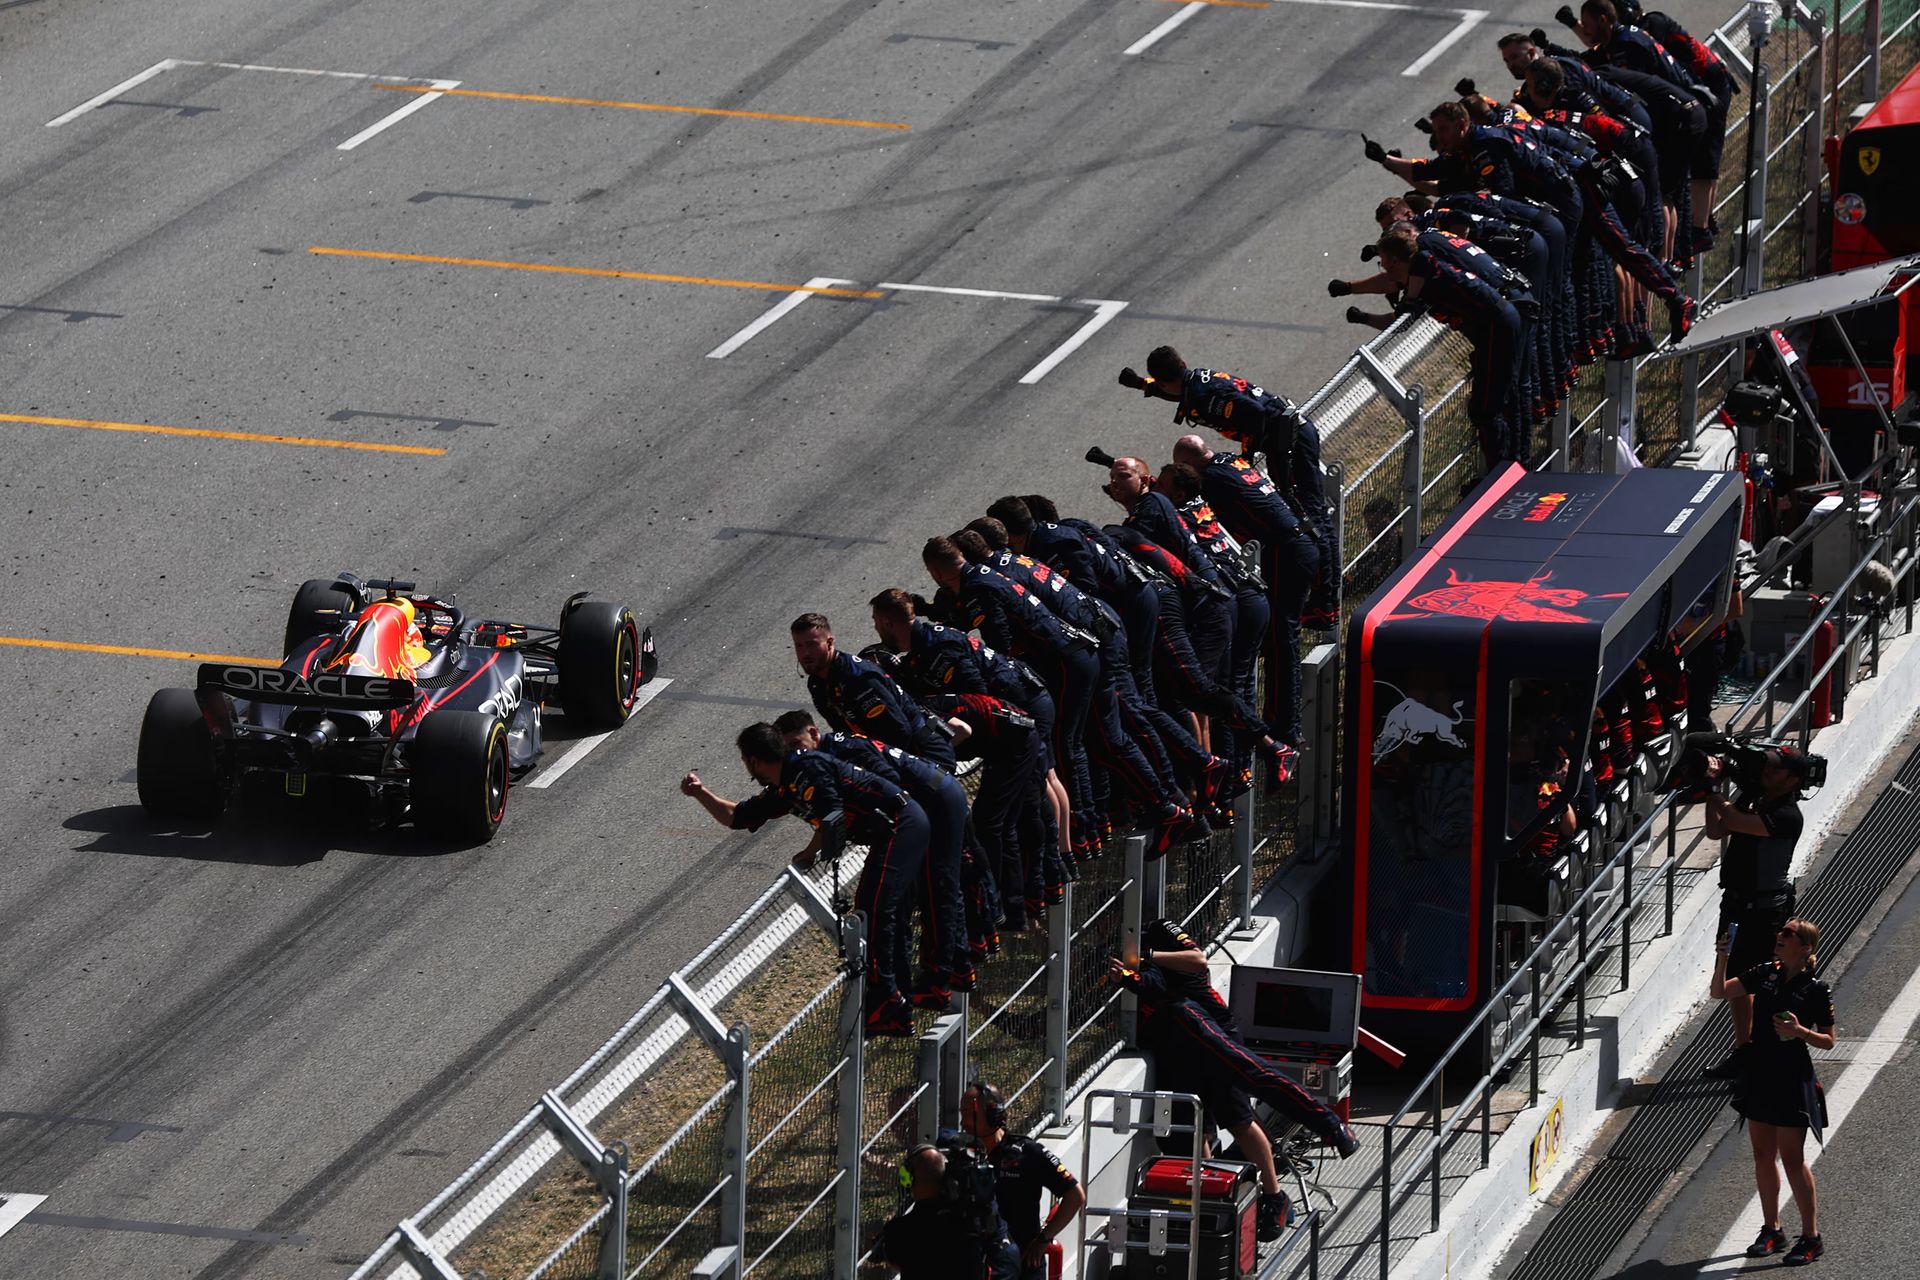  Controversy ensues as purported private exchanges spark questions in the F1 world, esspecially for Red Bull